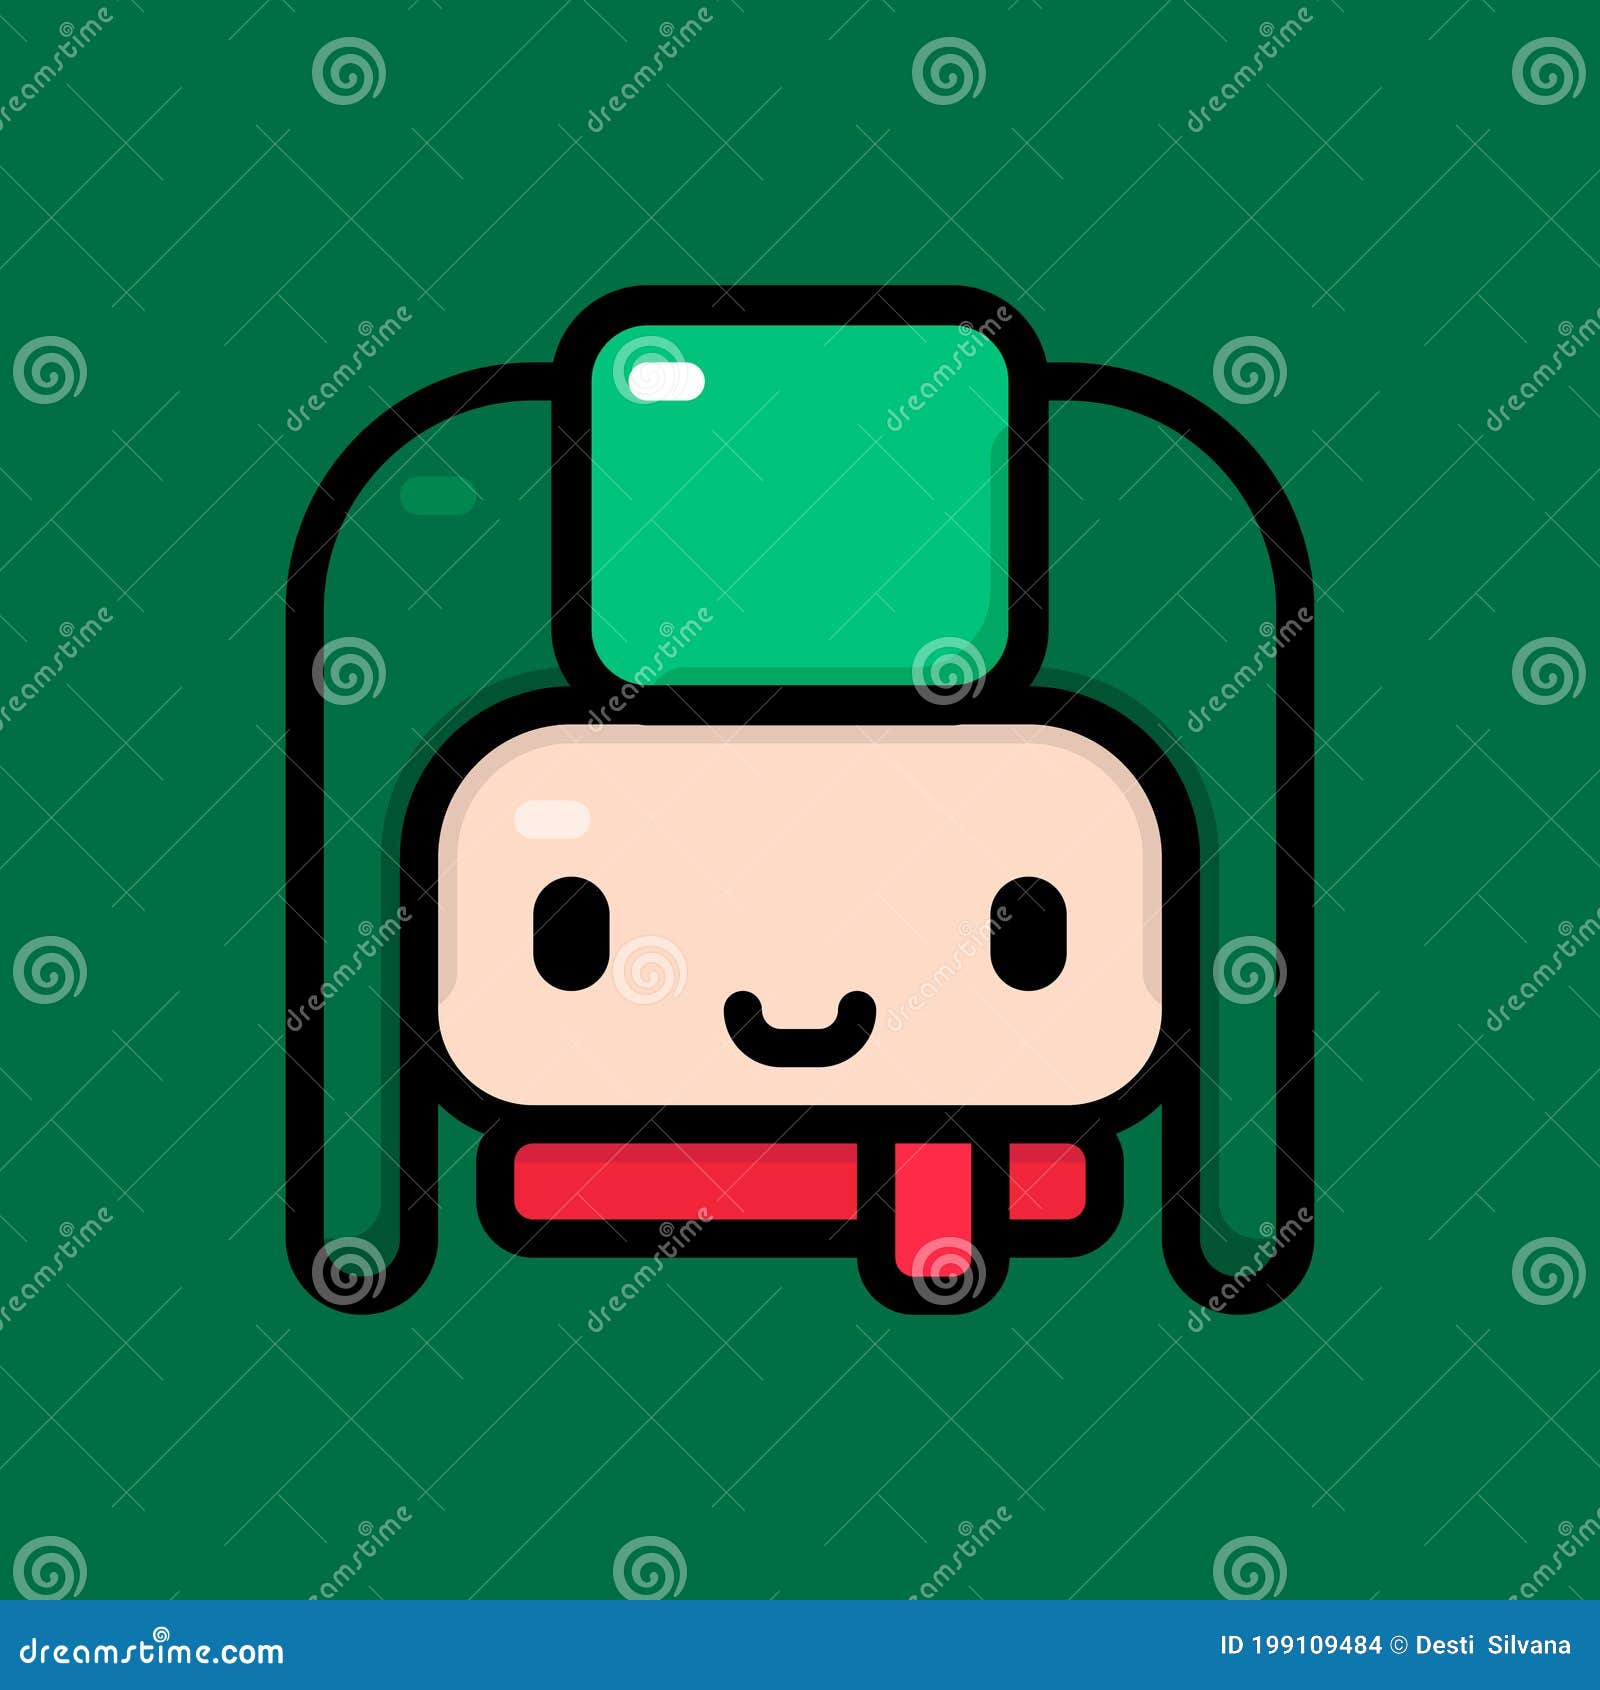 Green trapper cap hat Royalty Free Vector Image